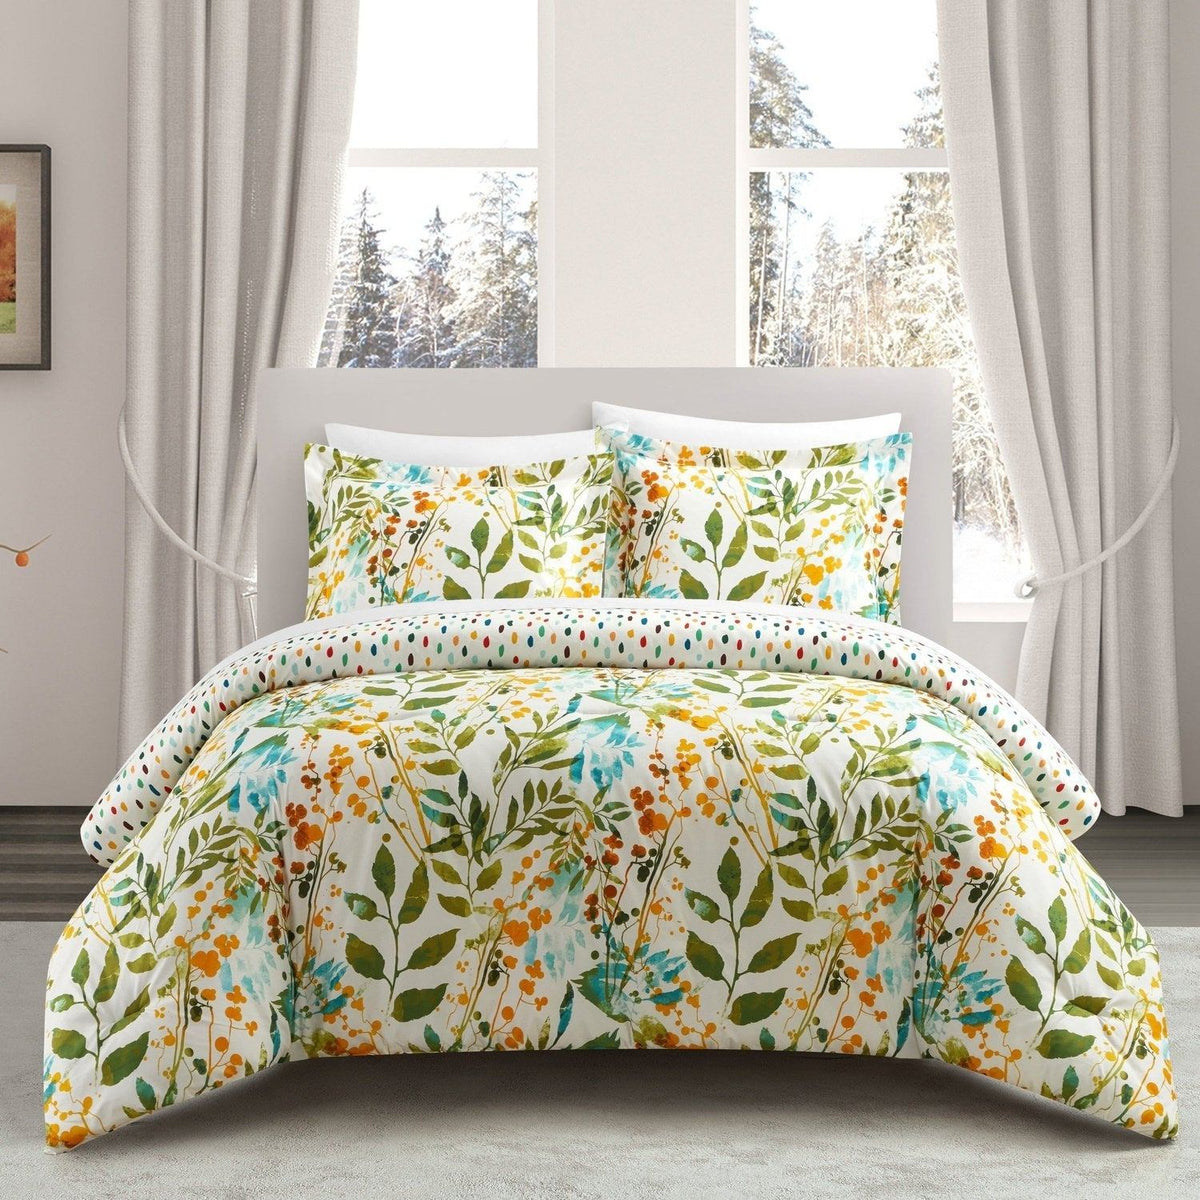 Chic Home Robin 3 Piece Reversible Floral Print Duvet Cover Set Twin